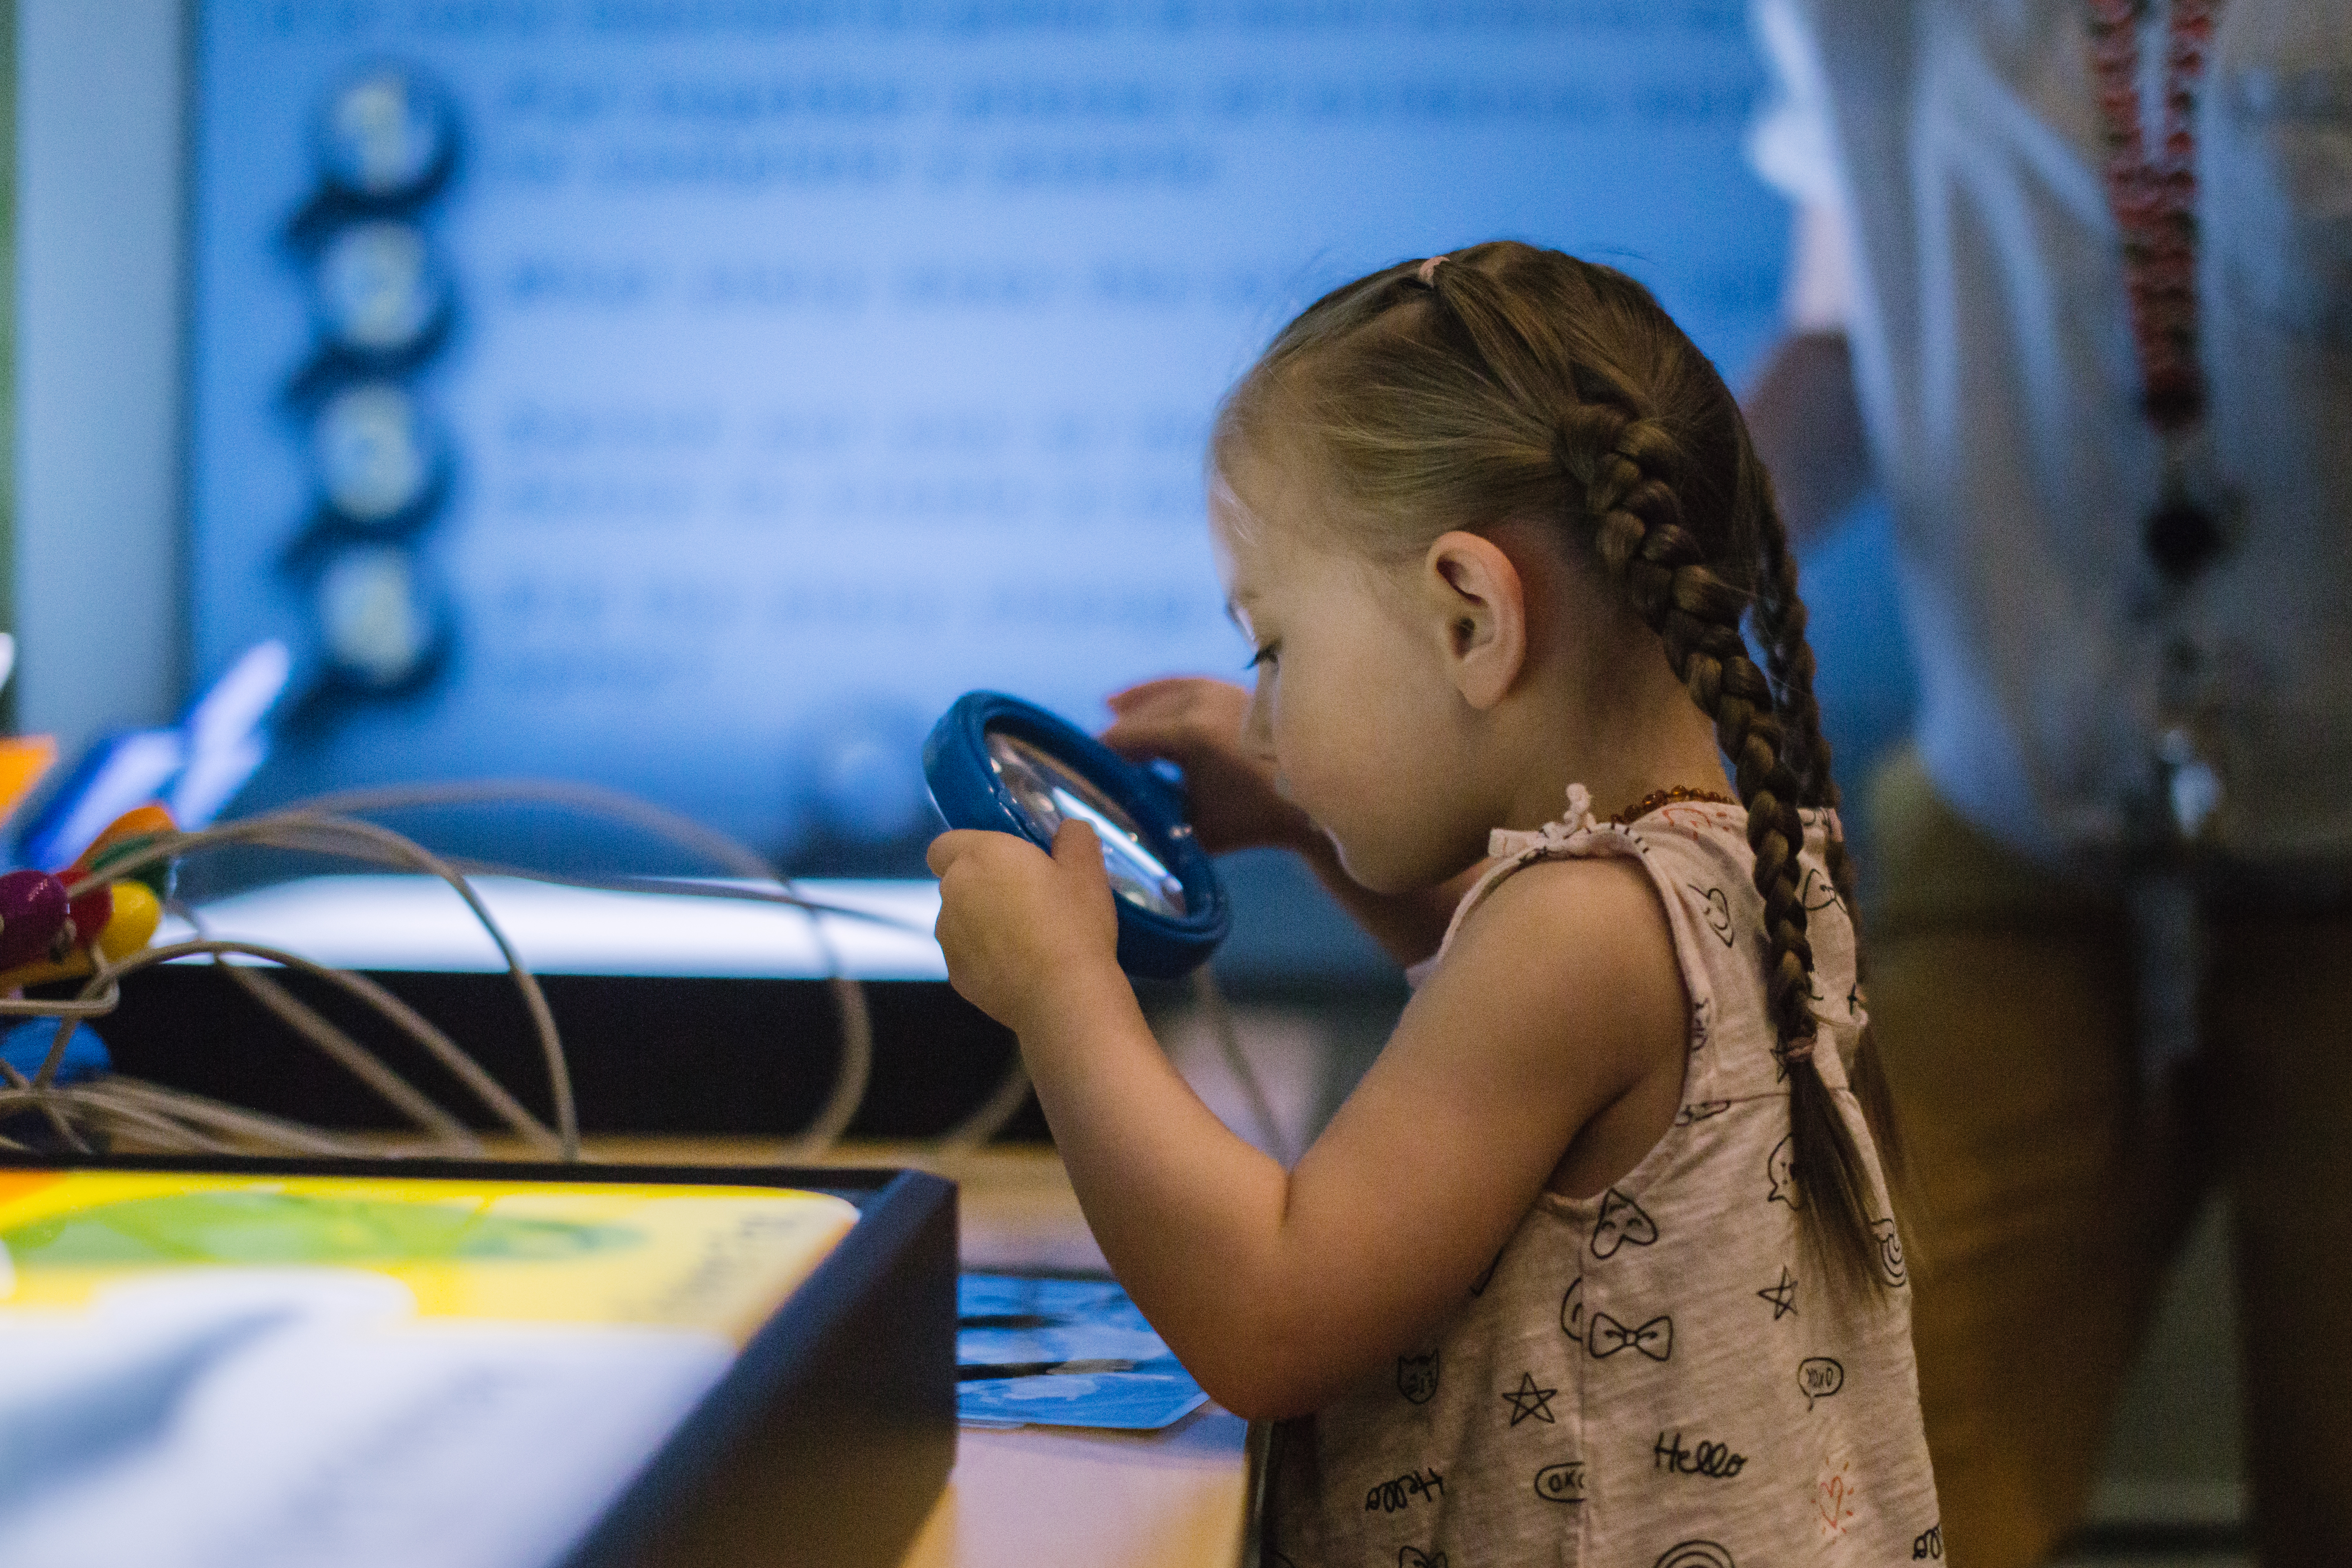 visitor exploring the evidence exhibit